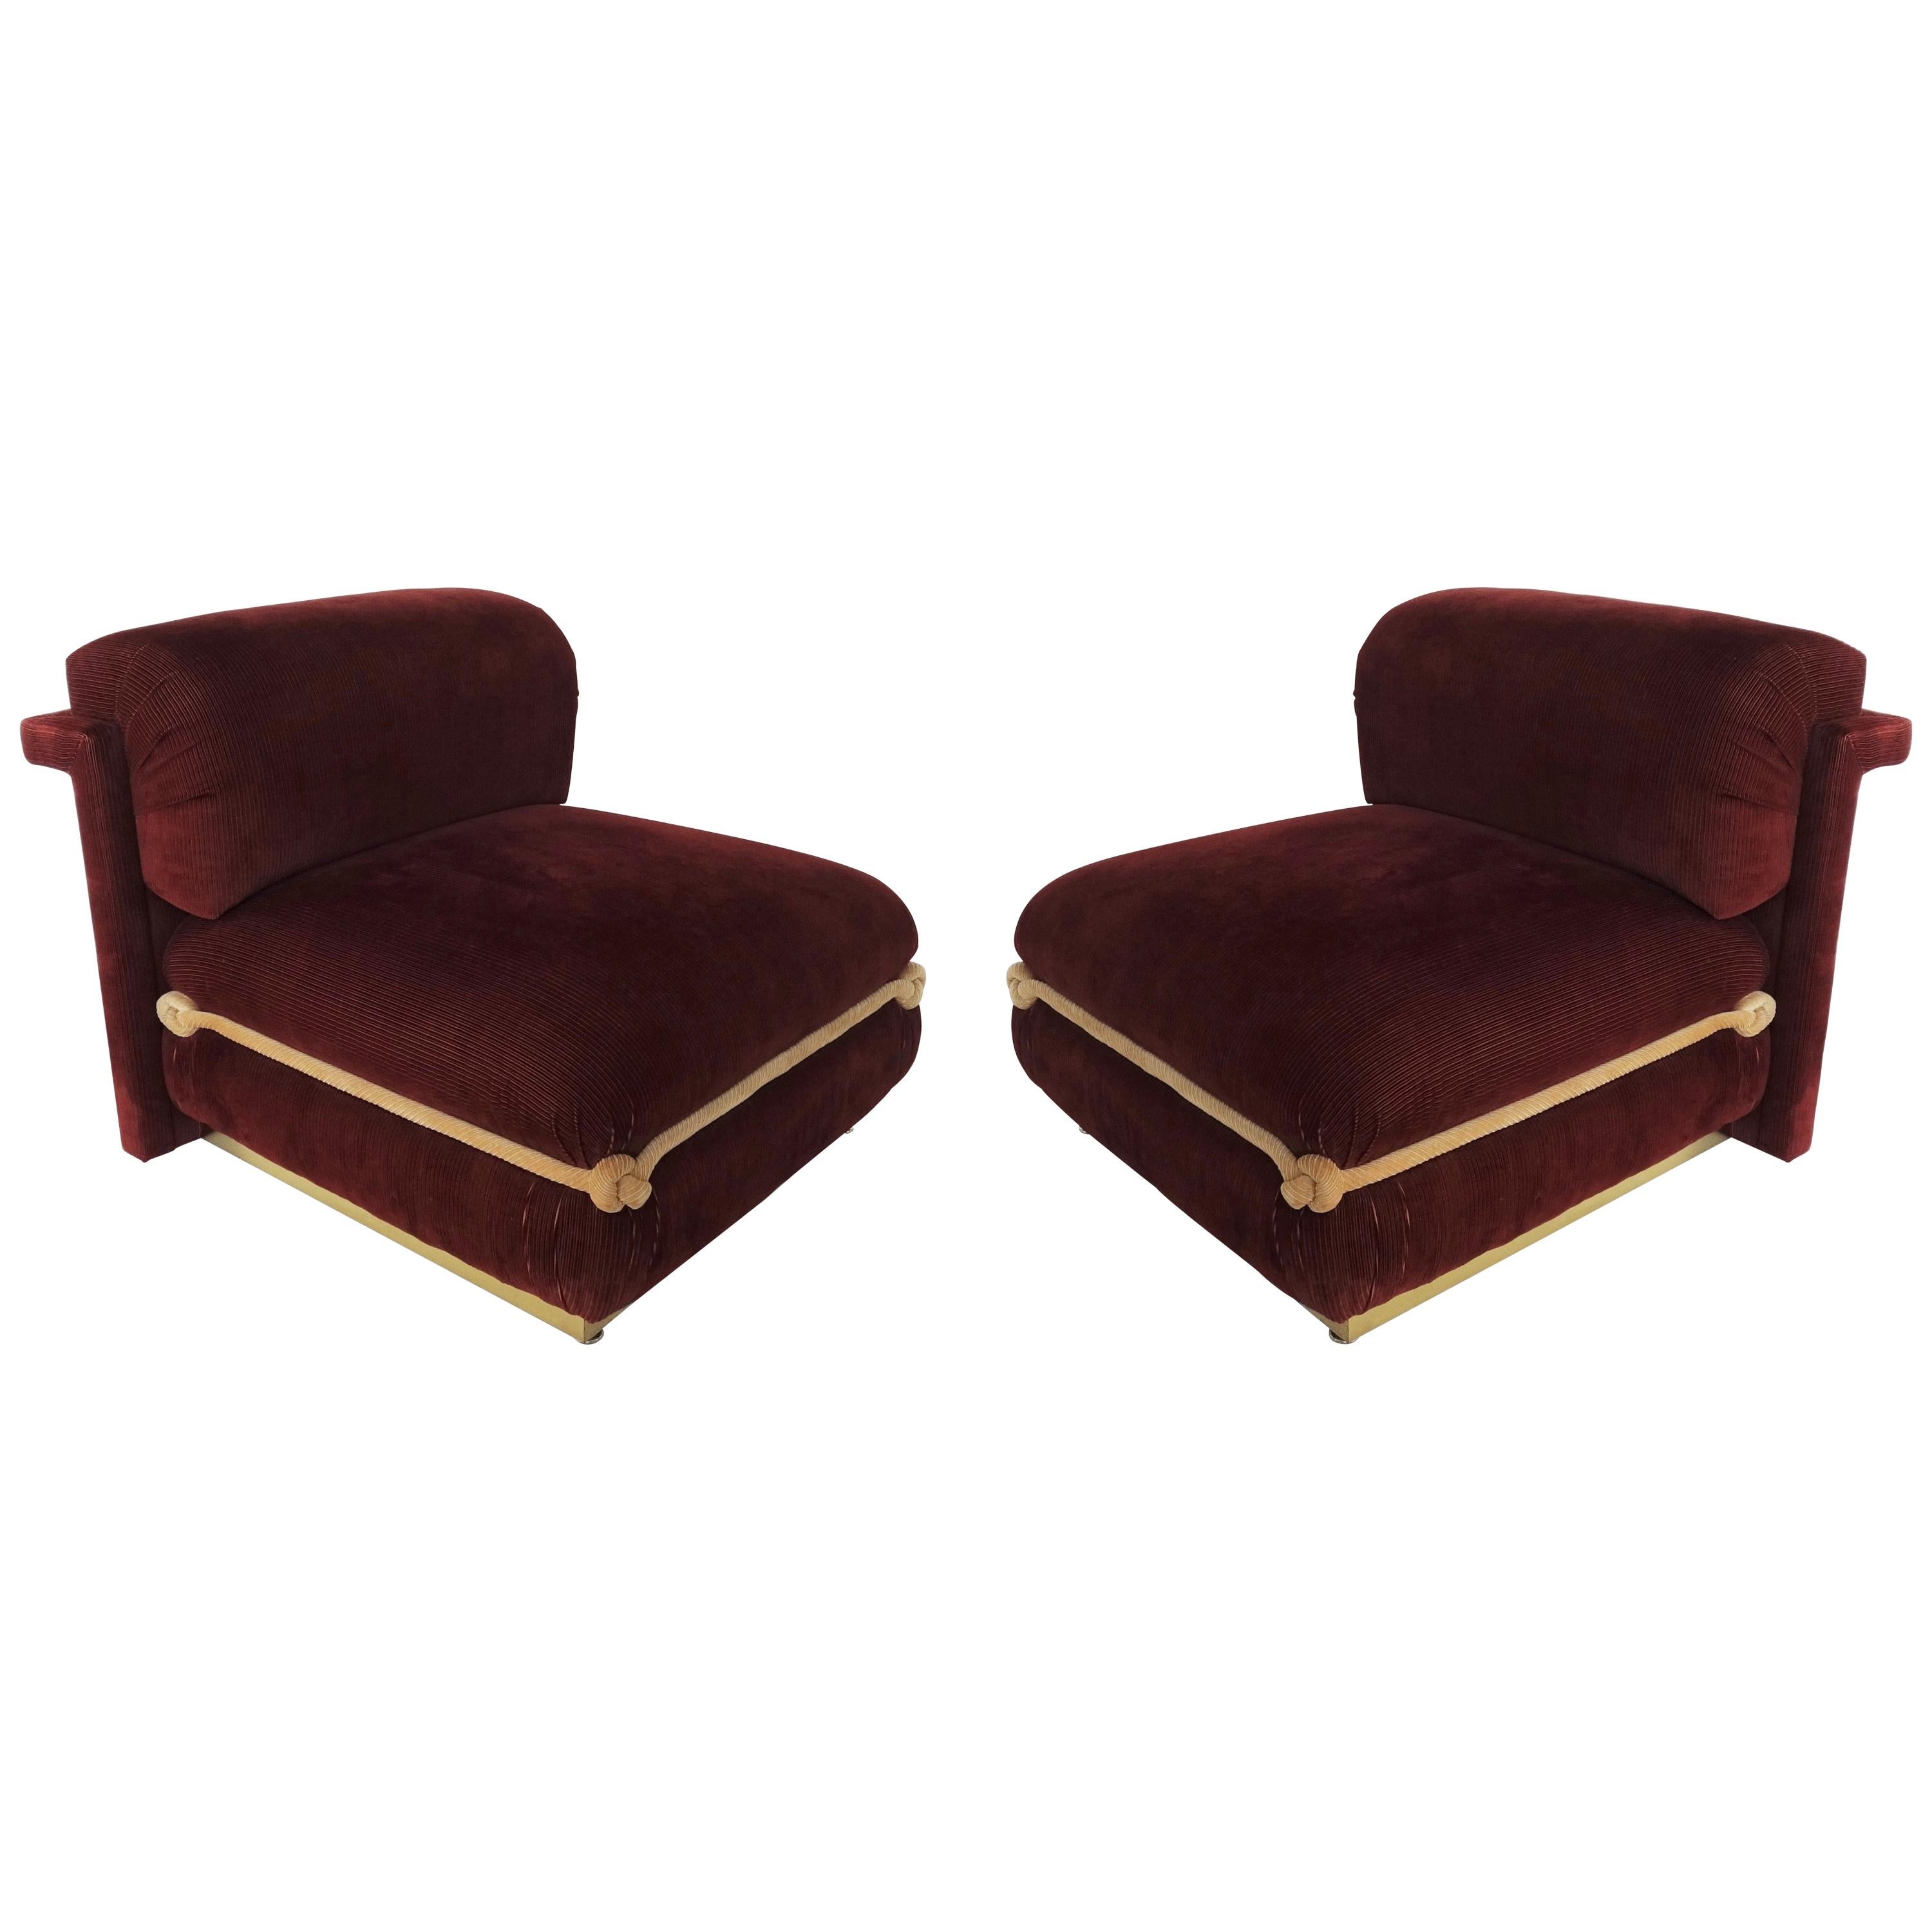 Spectacular Pair of French Art Deco Chairs with Brass Bases